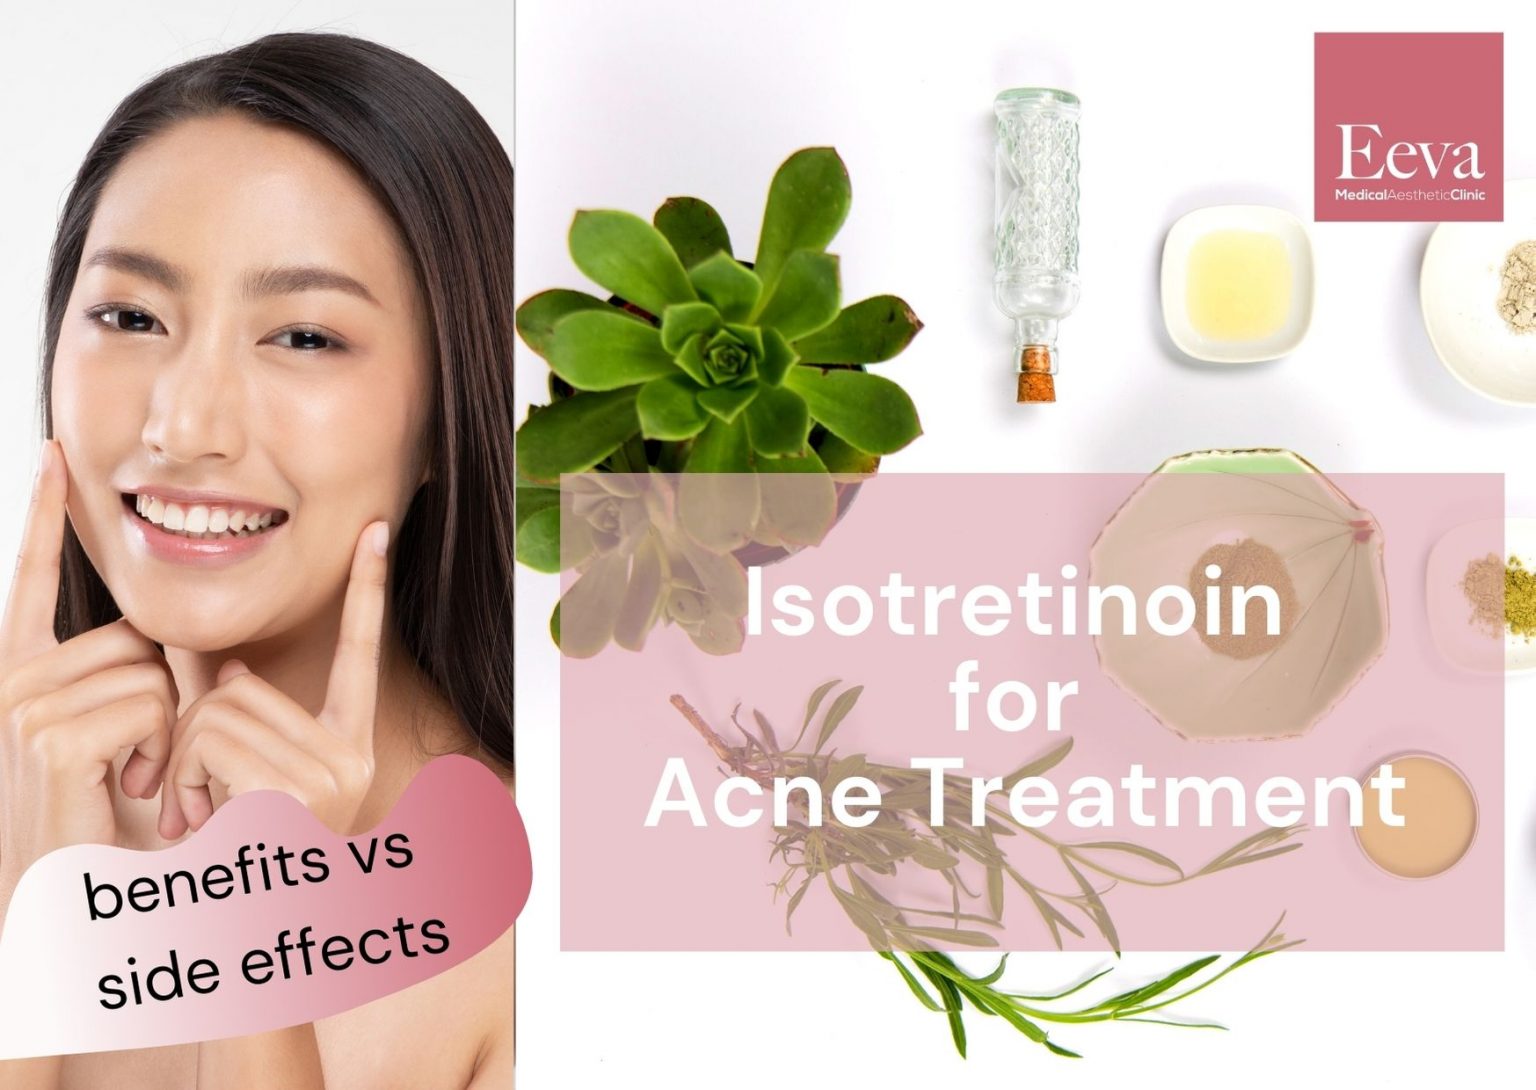 Use Of Isotretinoin For Acne Treatment Eeva Medical Clinic